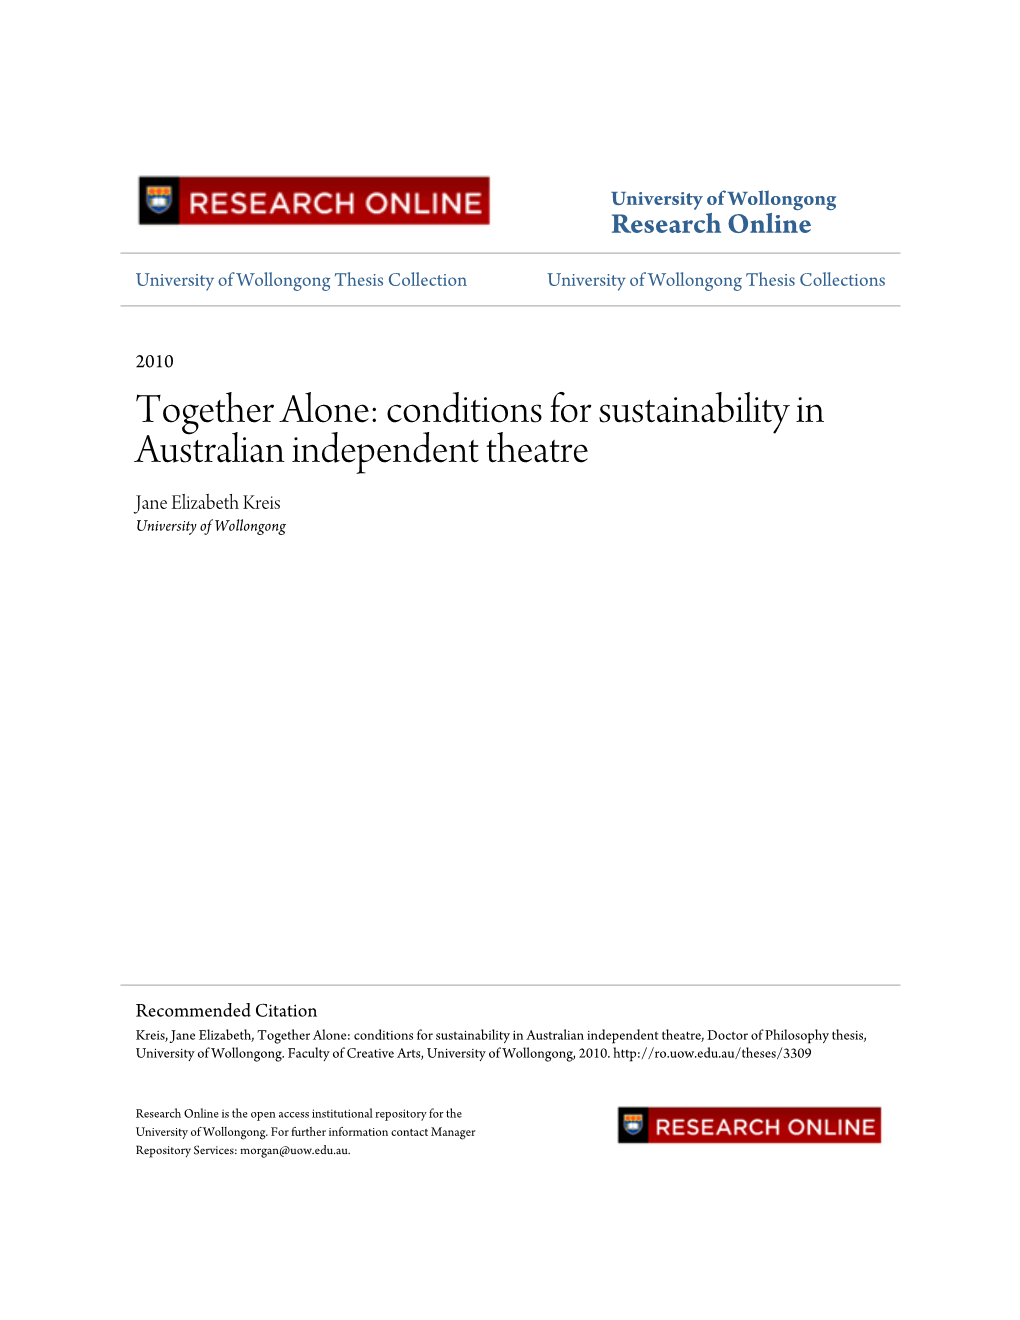 Conditions for Sustainability in Australian Independent Theatre Jane Elizabeth Kreis University of Wollongong